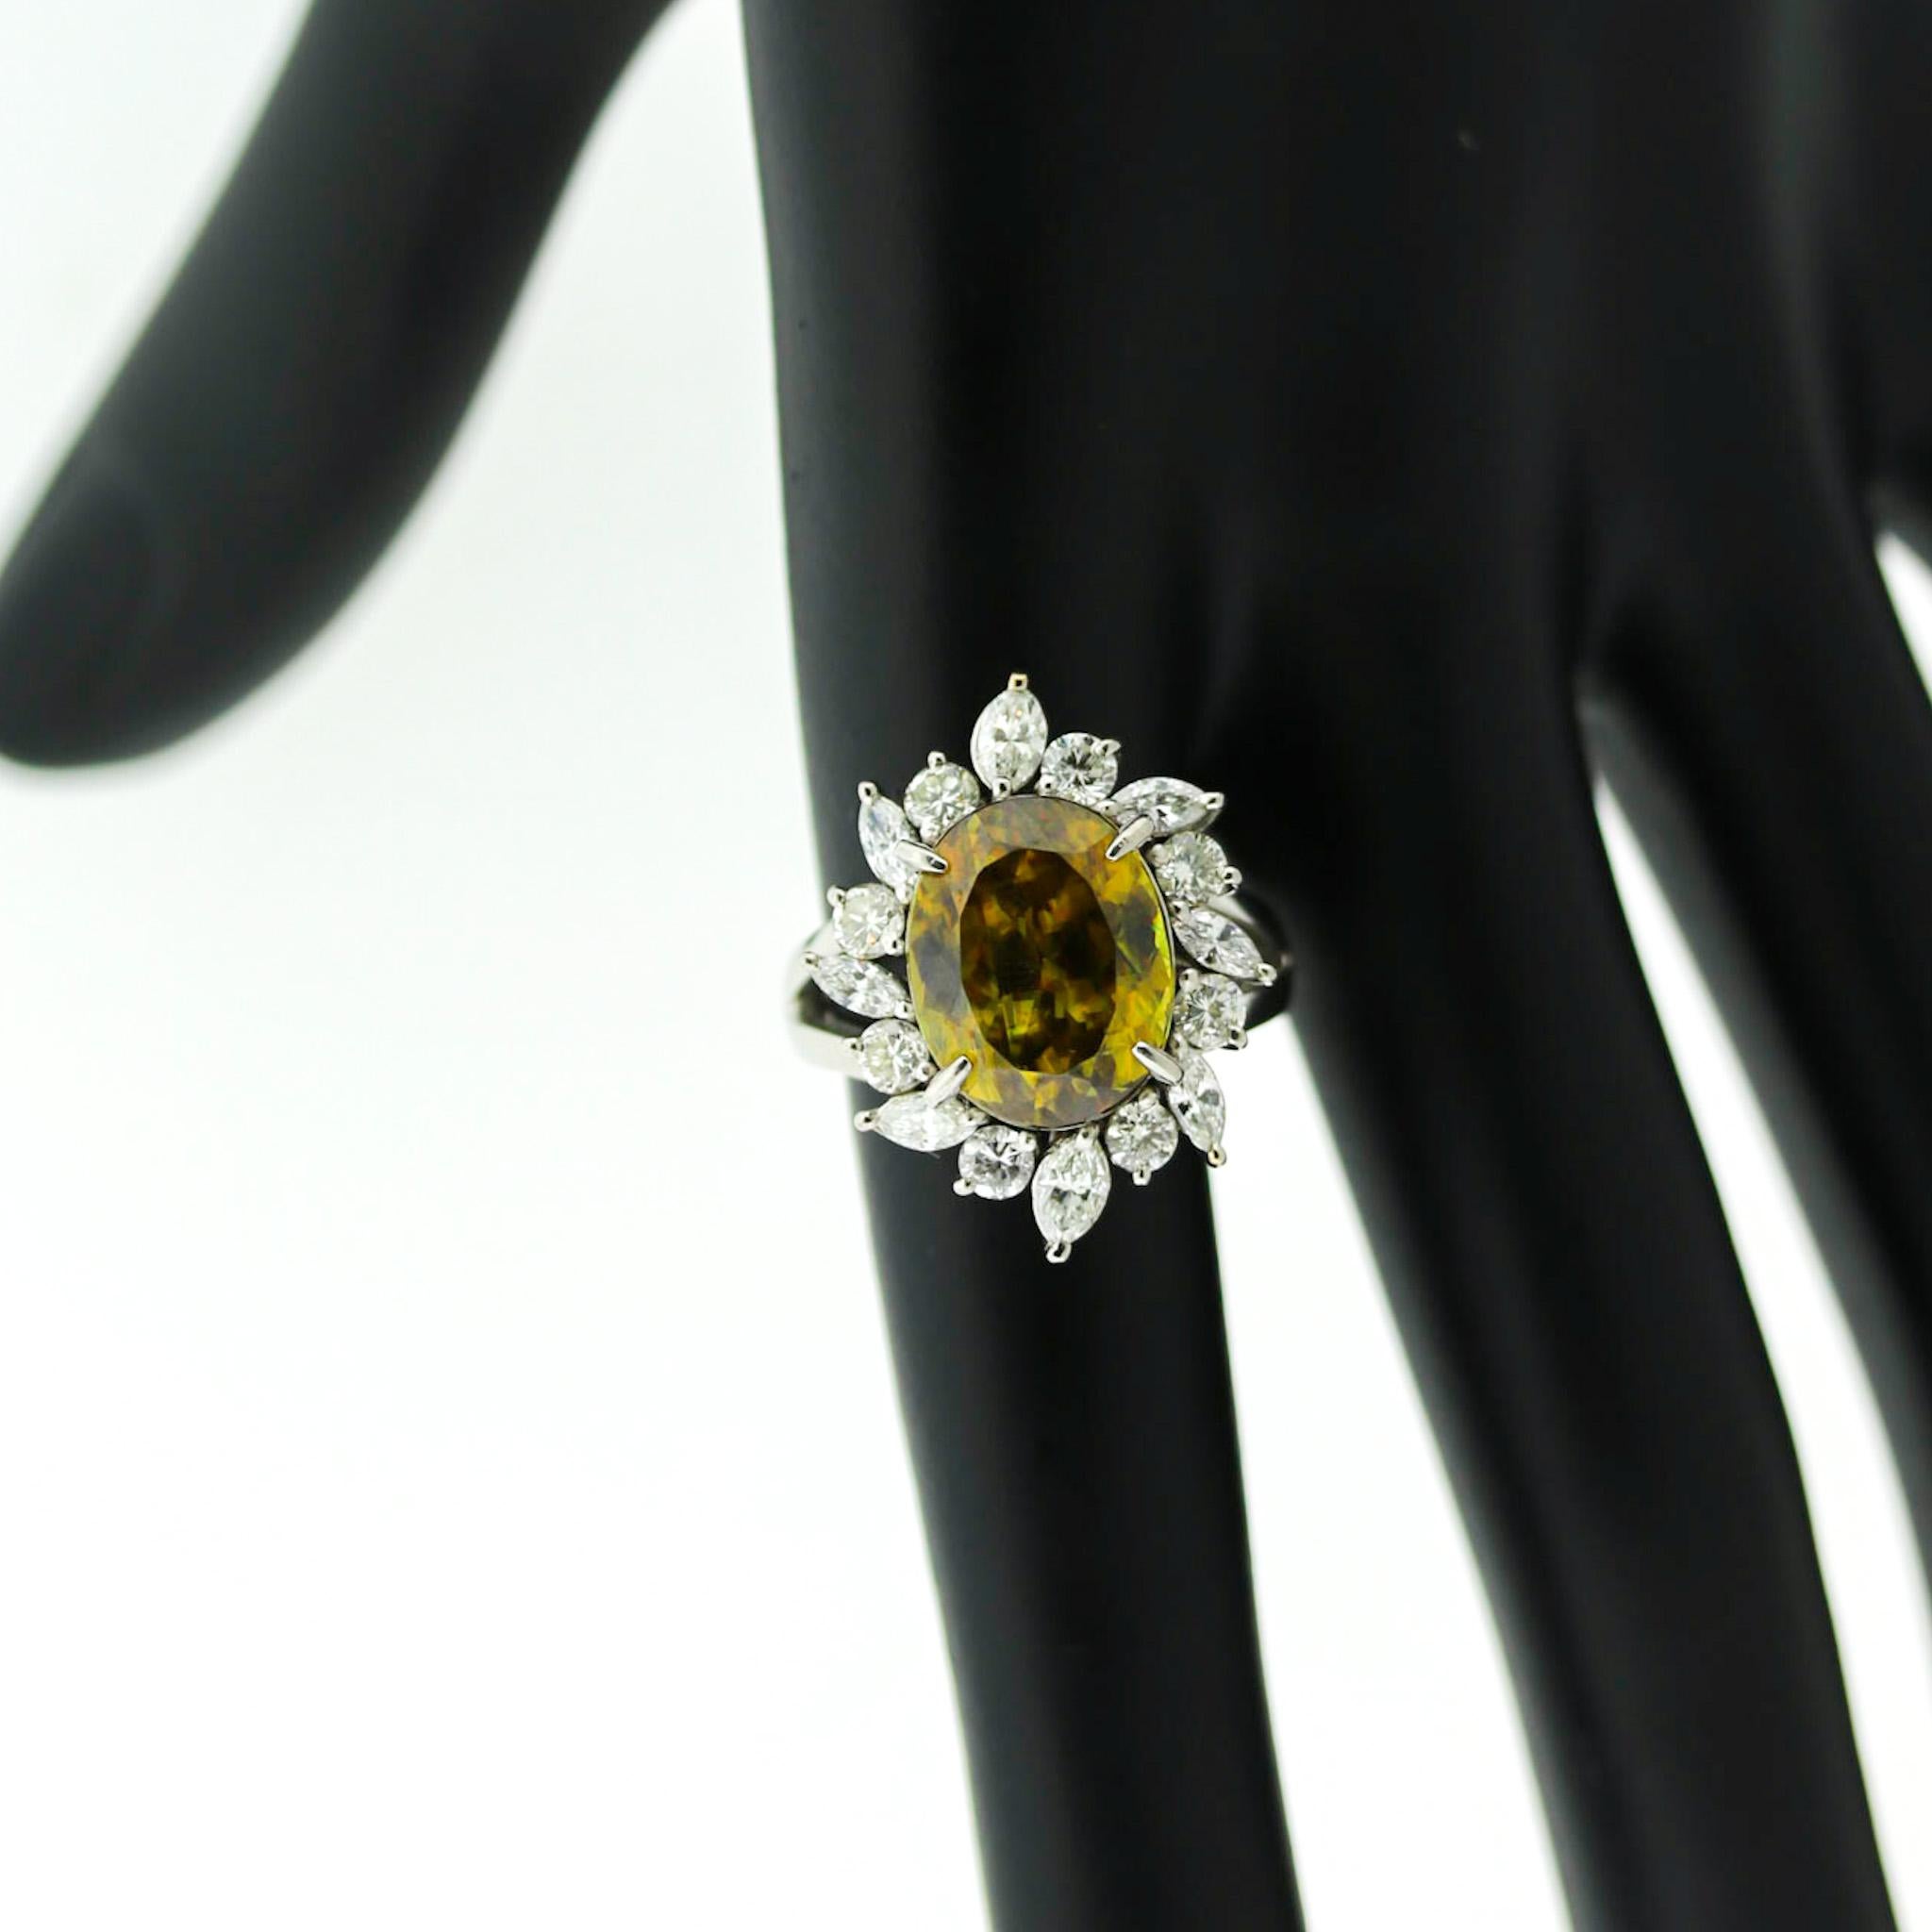 A beautiful sphene weighing 8.14 carats takes center stage of this fine platinum ring. It has very high dispersion, more than diamond, giving it amazing fire as a spectral array of colors can be seen flashing off its facets. It is accented by a halo